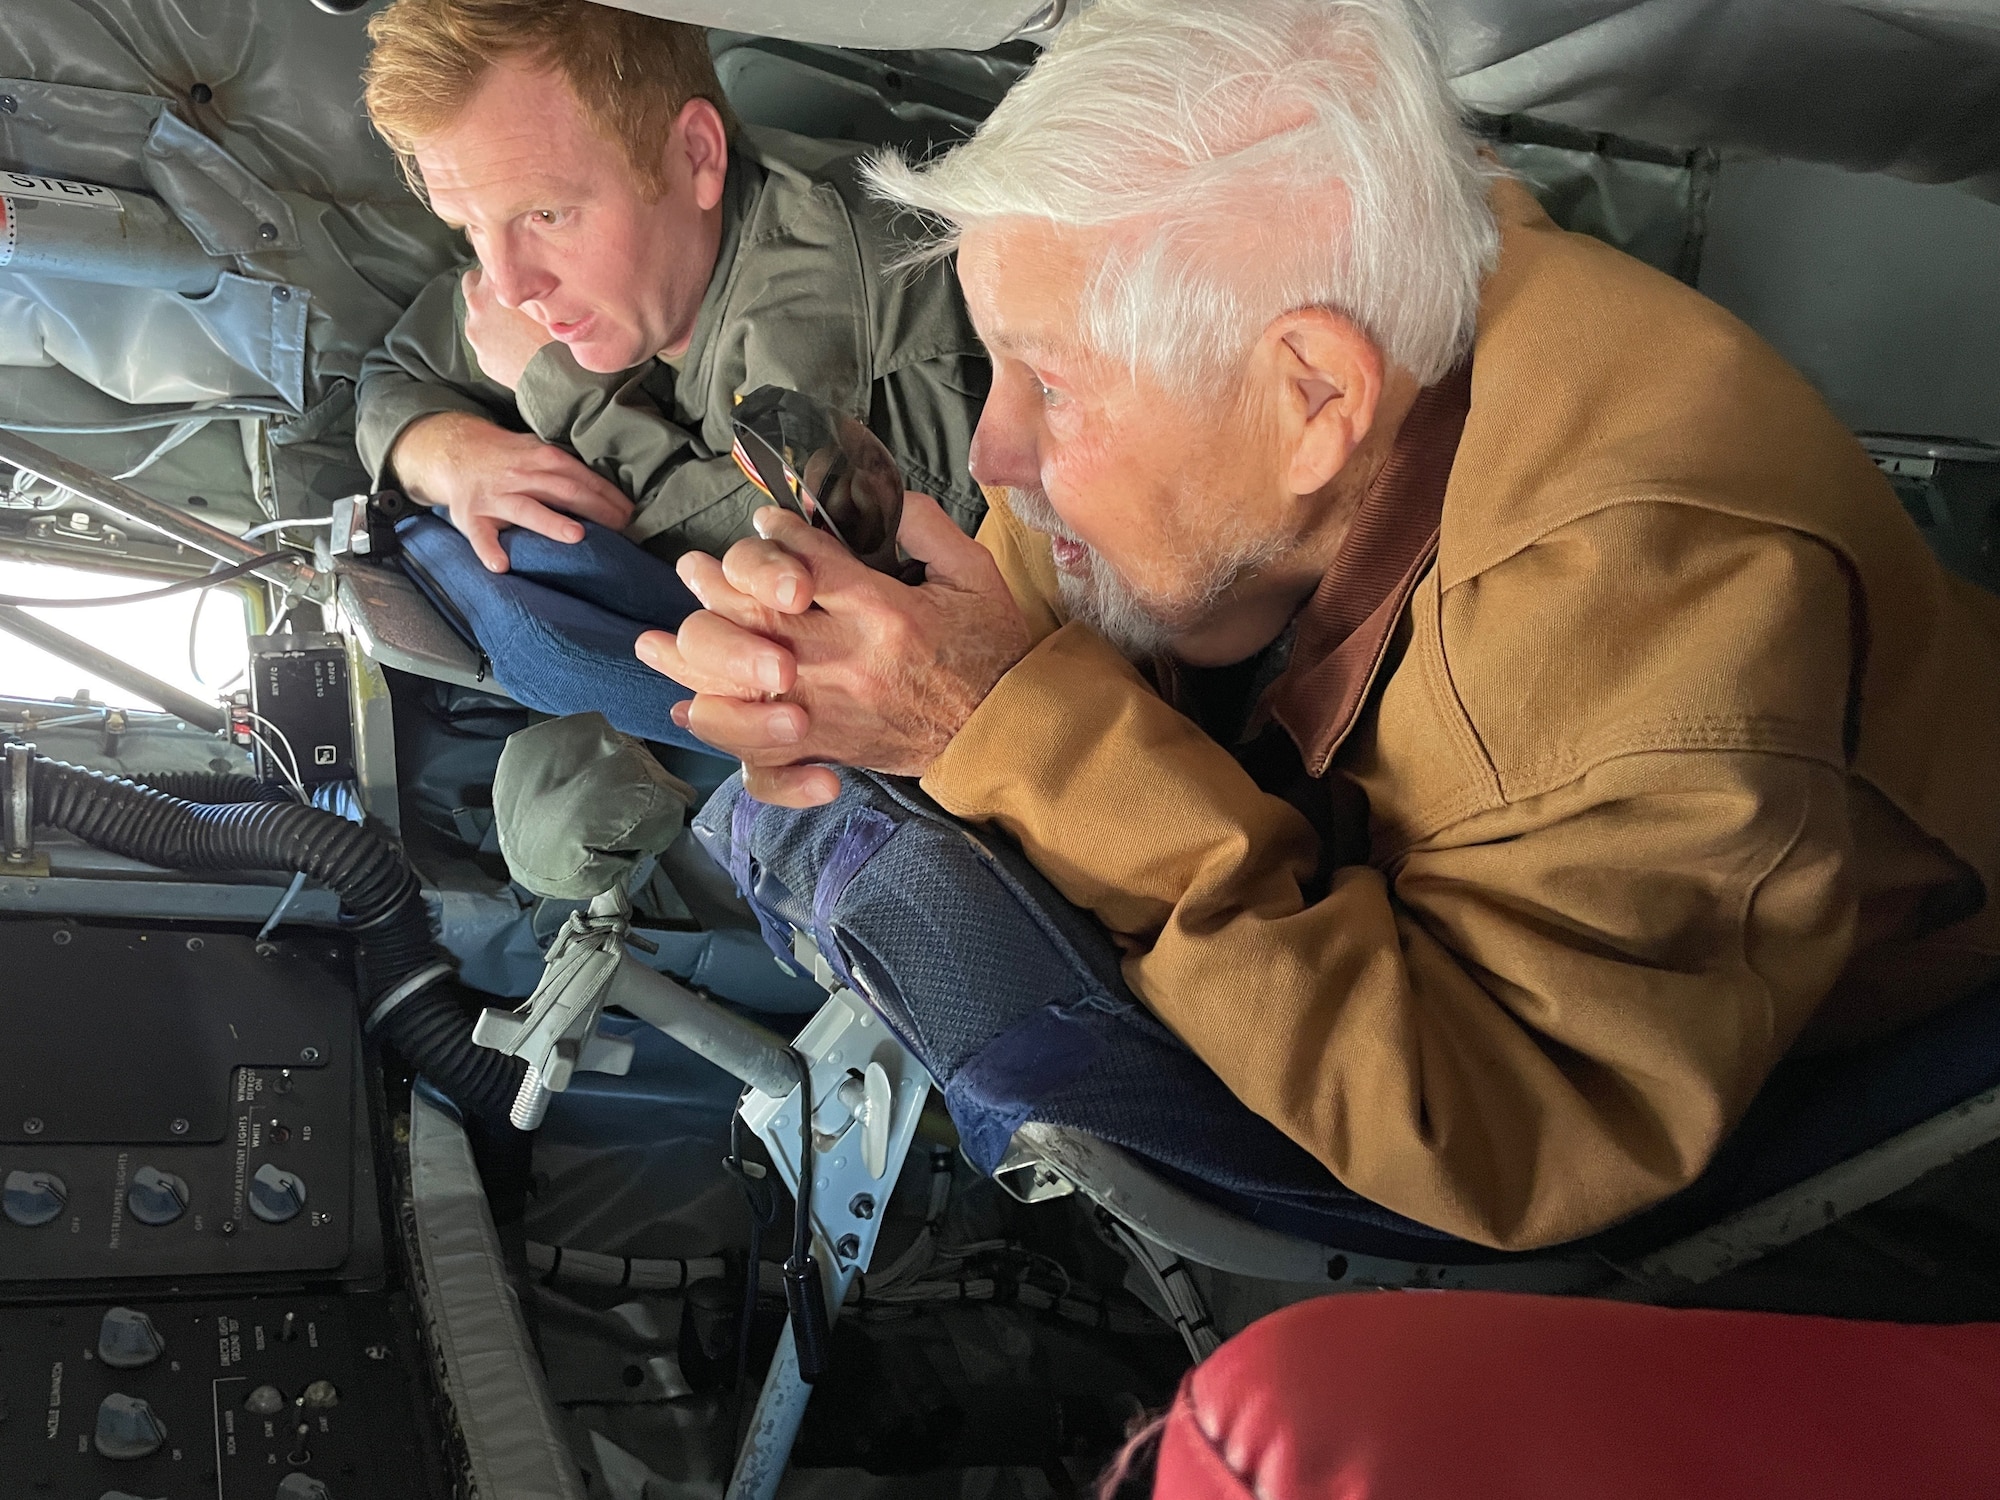 U.S. Air Force Tech. Sgt. Joshua Schultz, 186th Air Refueling Wing boom operator, shows James Roberts, a former U.S. Air Force boom operator,  the controls in the boom pod of a KC-135R aircraft, Nov. 6, 2021, at Key Field Air National Guard Base, Mississippi. Boom operators are highly trained experts who pump thousands of gallons of fuel to other aircraft midflight.